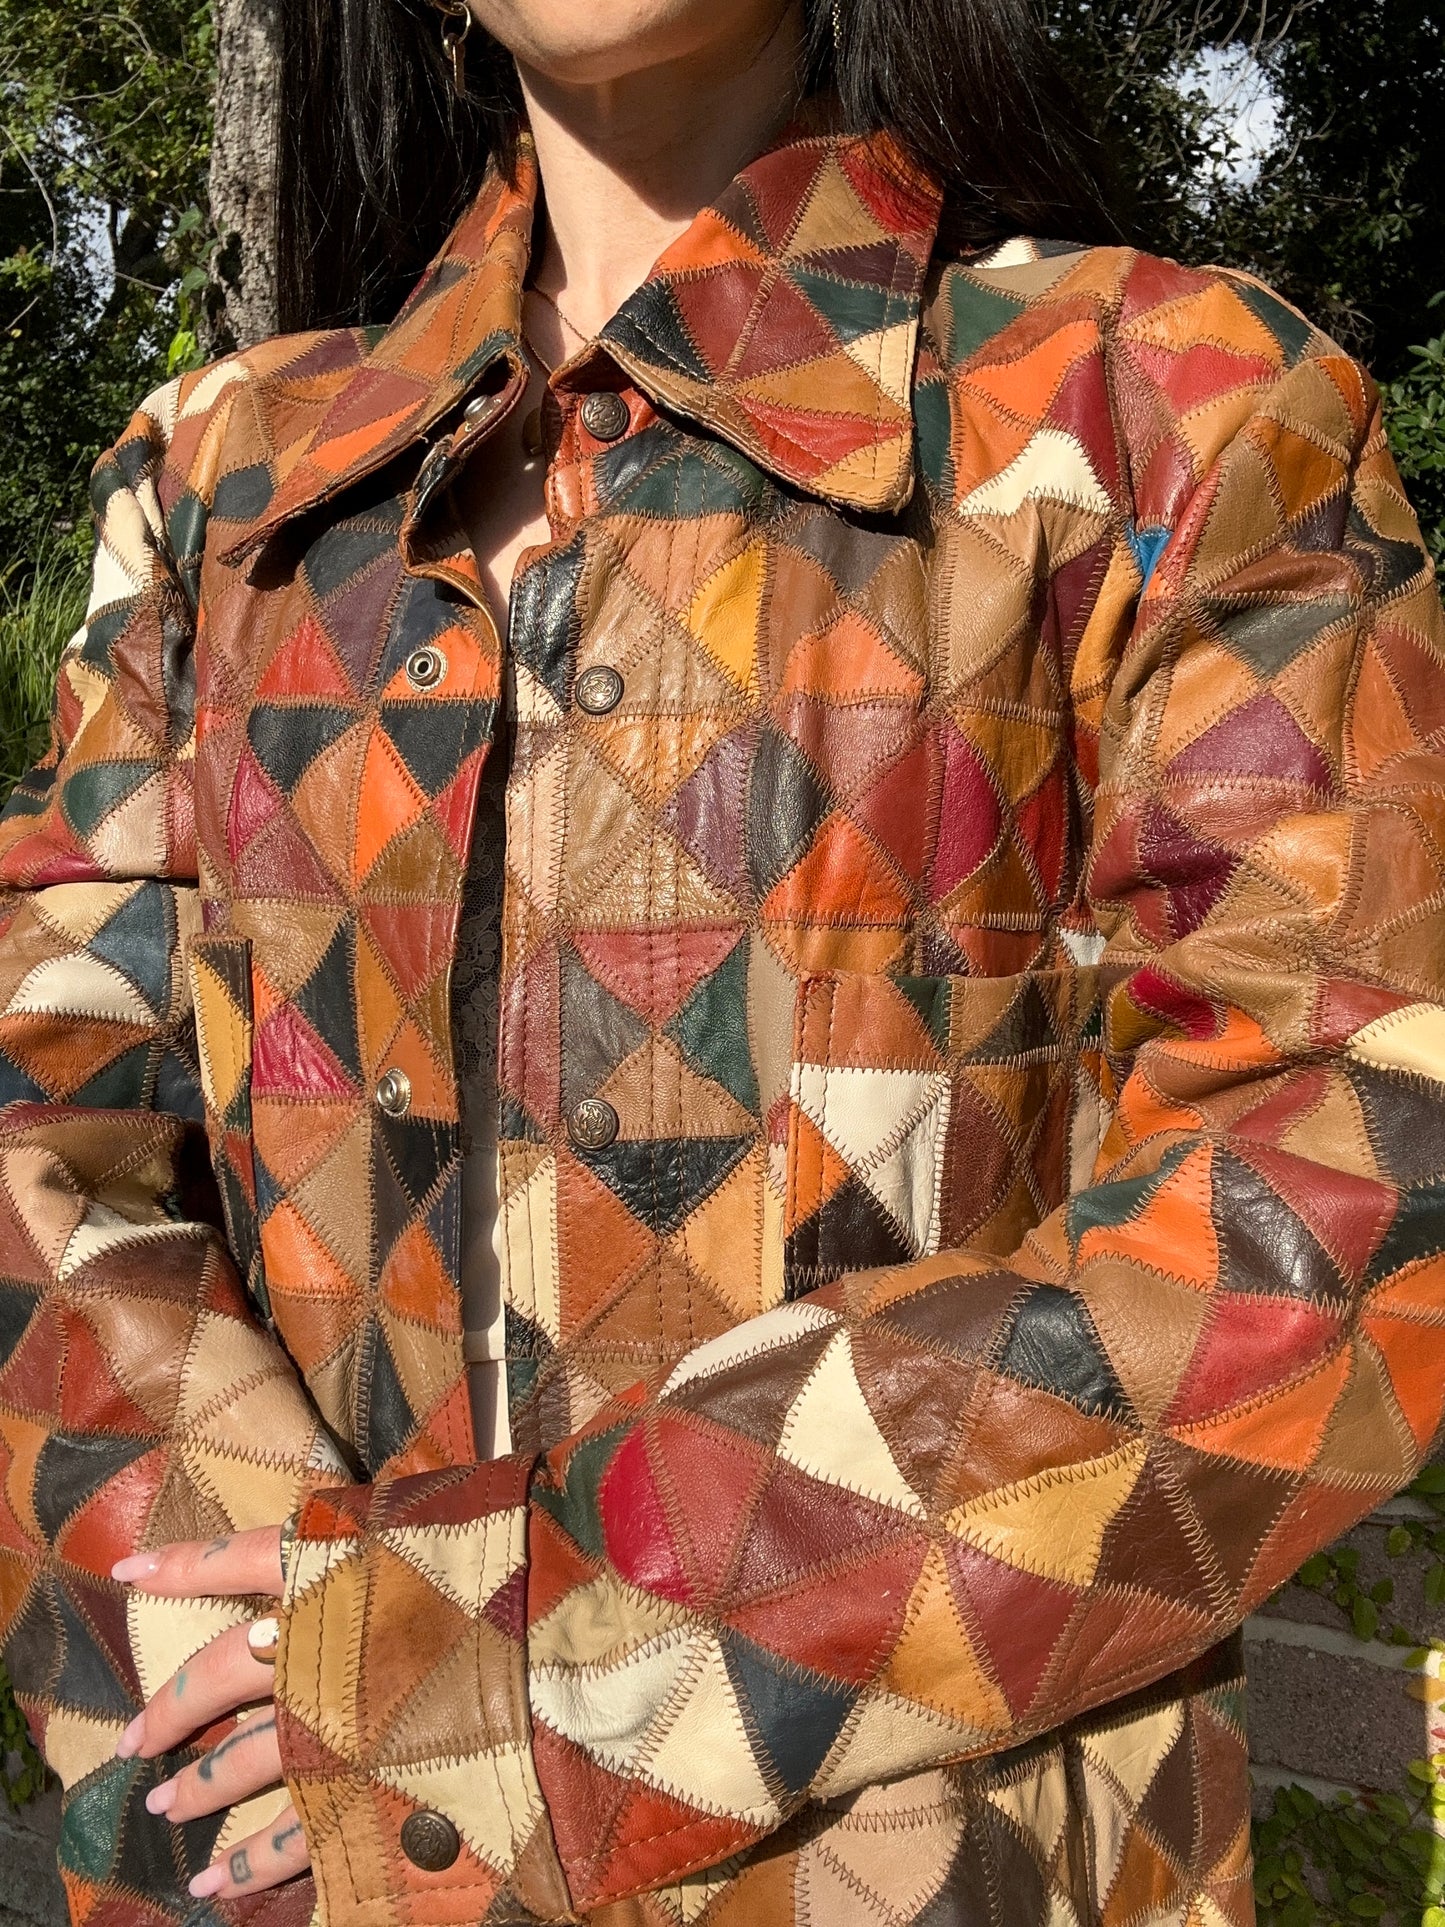 Rare Vintage 1970's Leather Quilted Patchwork Jacket - By: Field and Stream Gordon & Fergusun